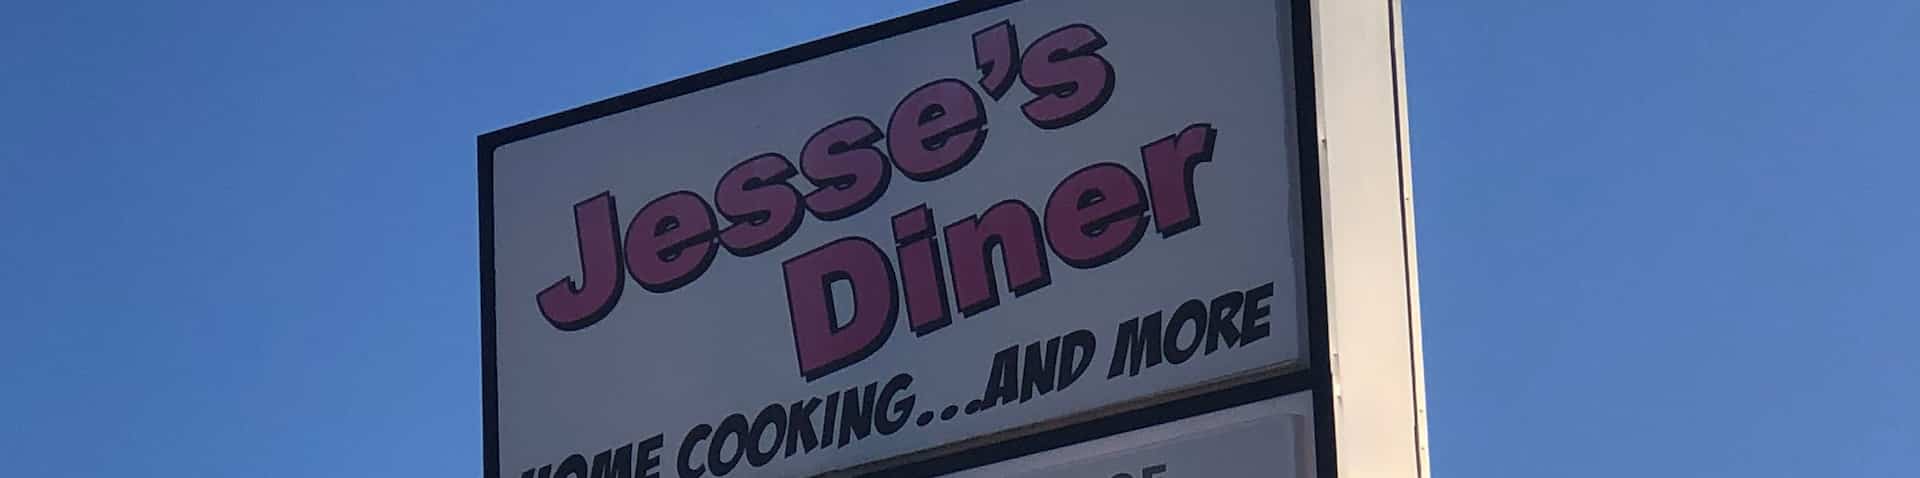 sign in front of restaurant